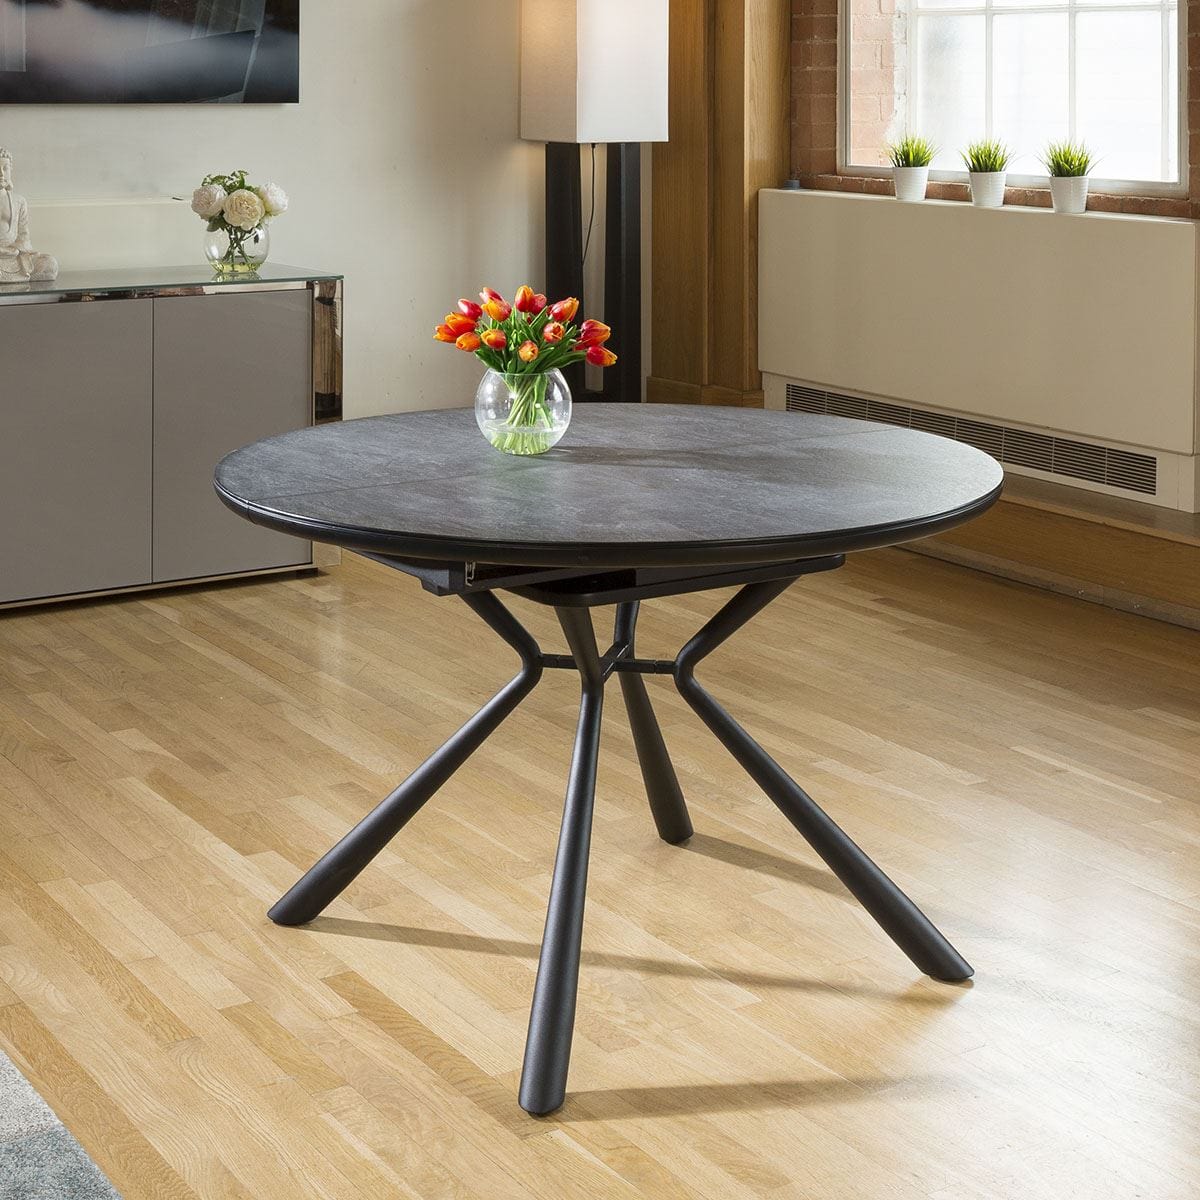 Quatropi Round Slate Effect Melamine Dining Table Extends +4 Grey Fabric Chairs